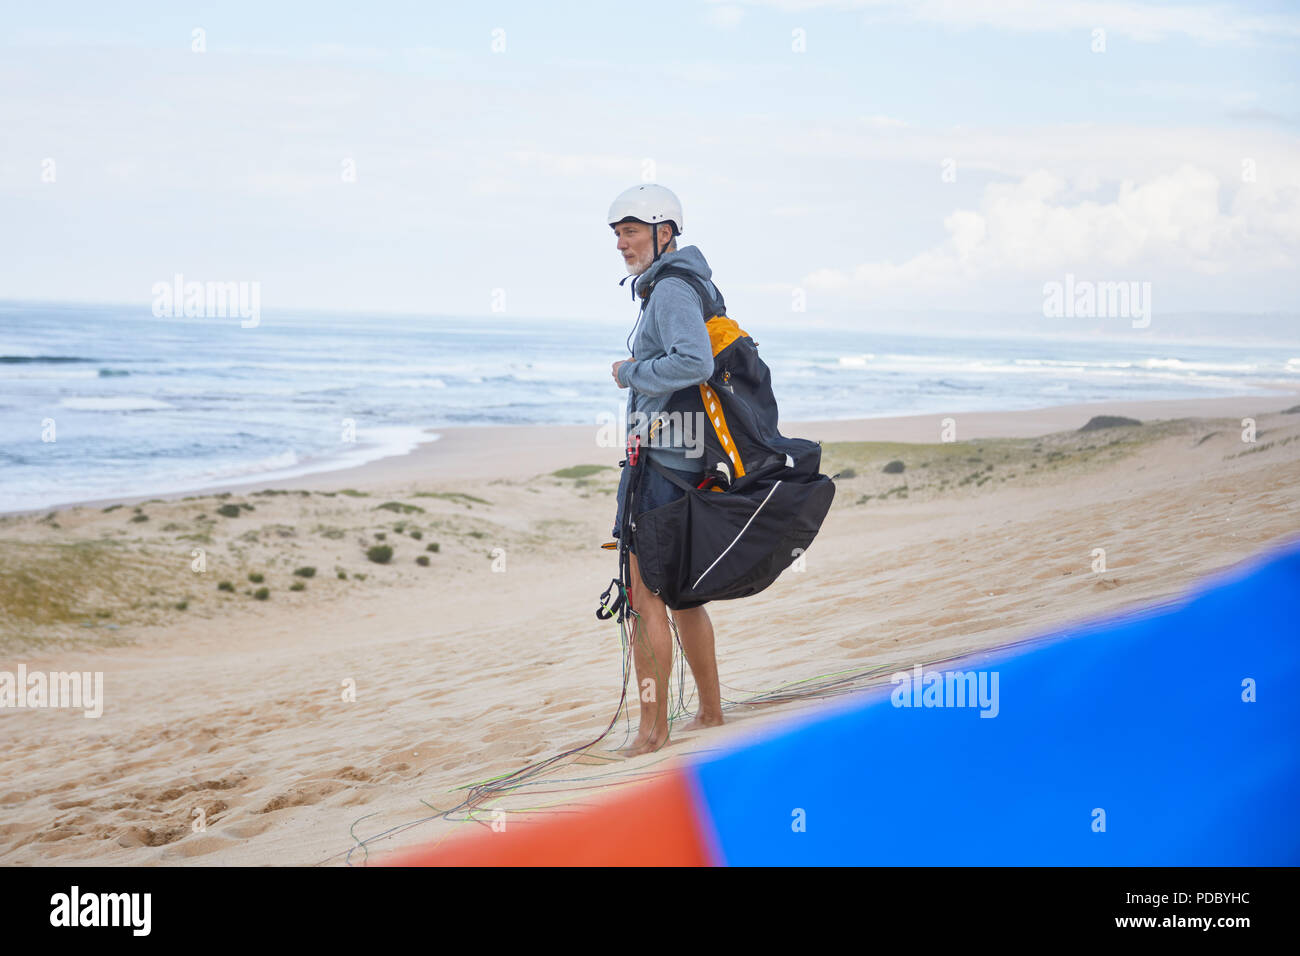 Paraglider with parachute backpack on ocean beach Stock Photo